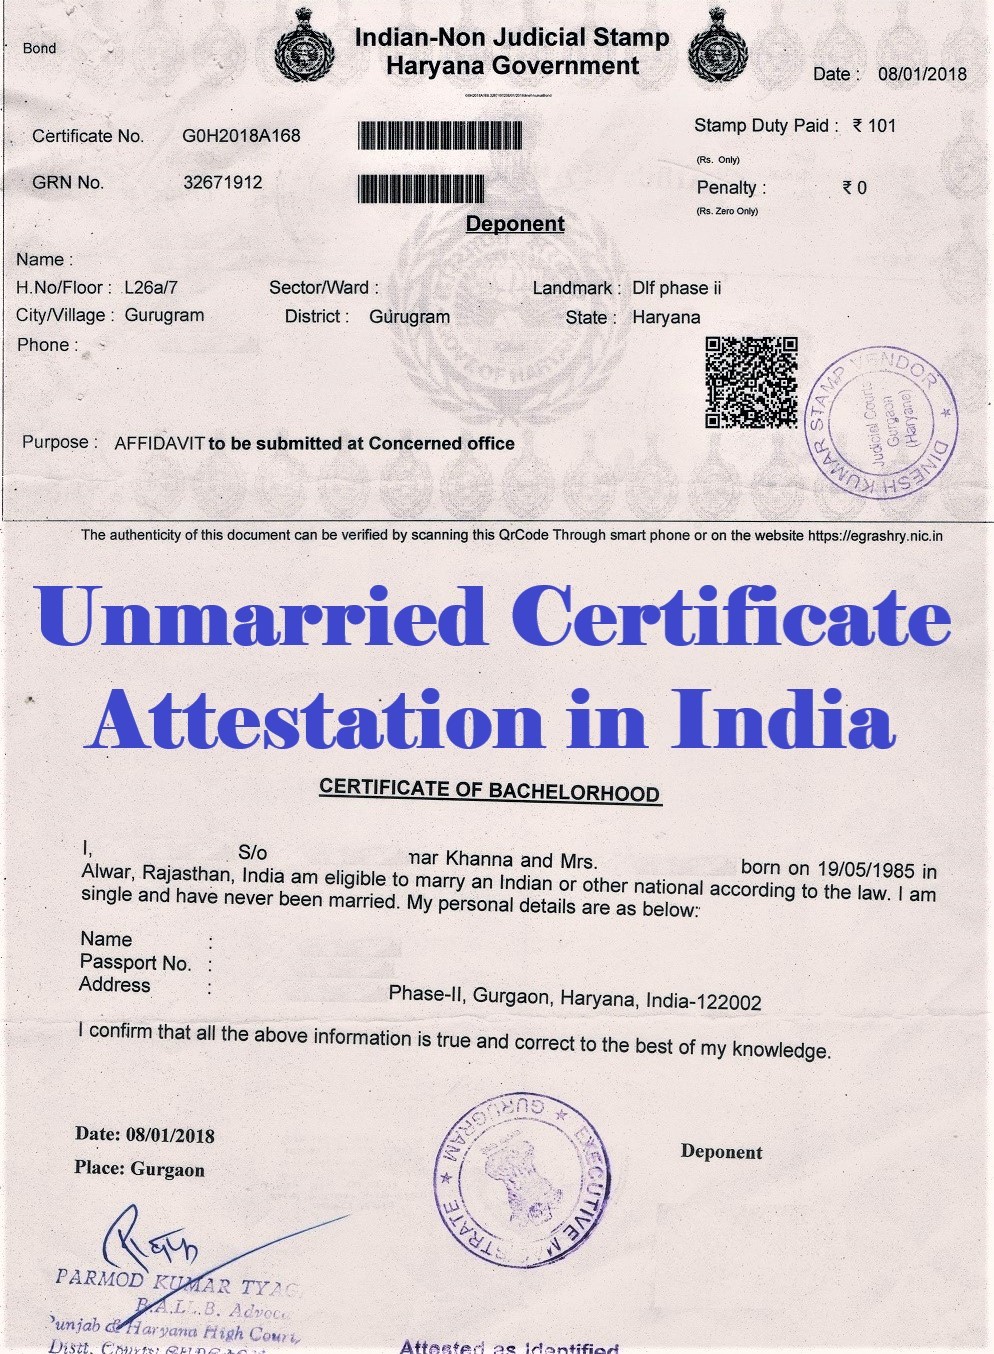 Unmarried Certificate Attestation from Zimbabwe Embassy